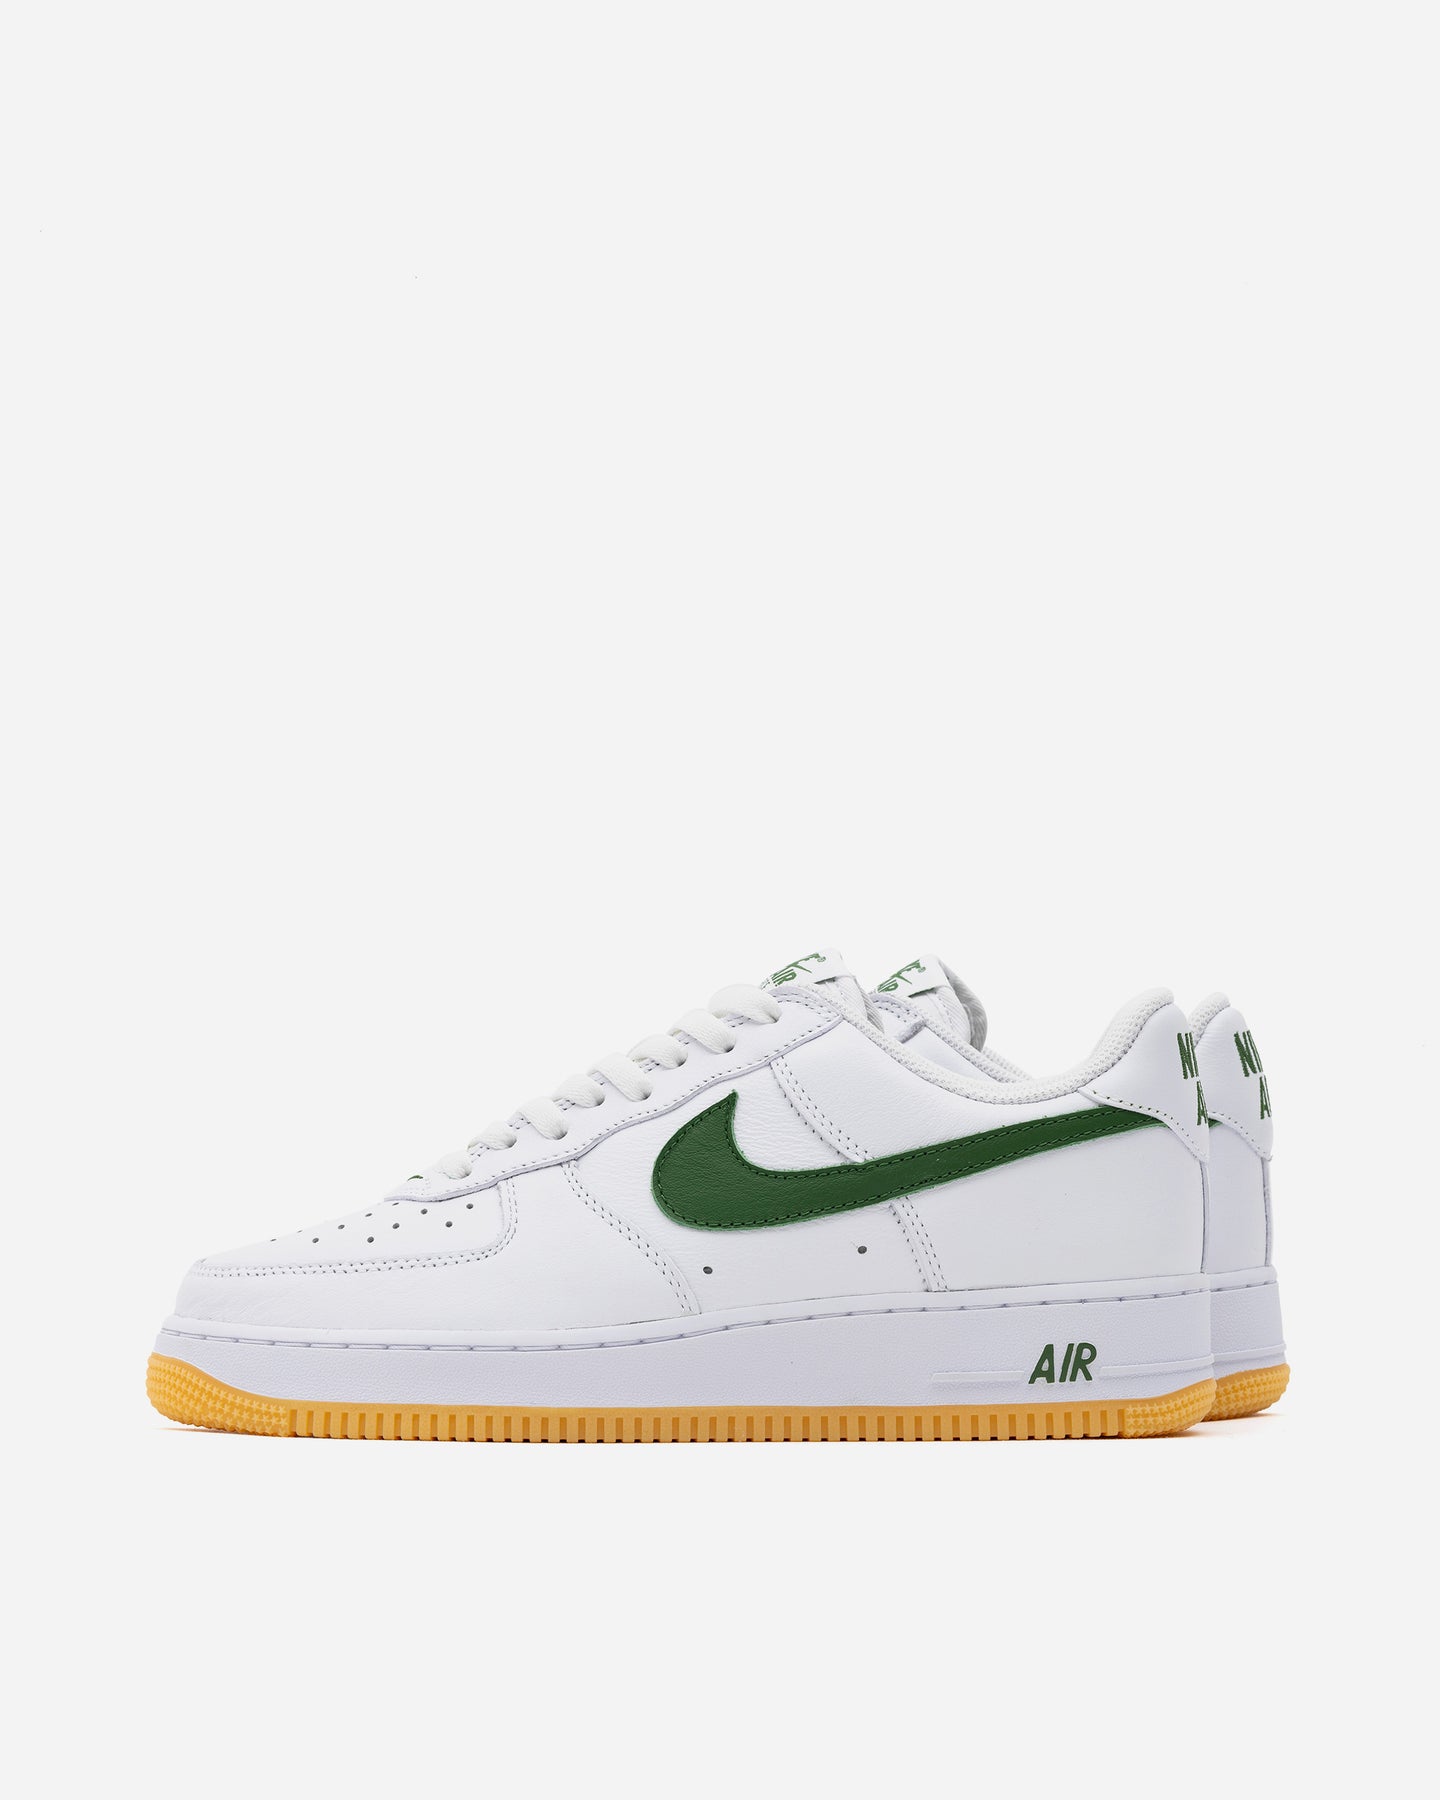 NIKE AIR FORCE 1 LOW RETRO QS – A+S